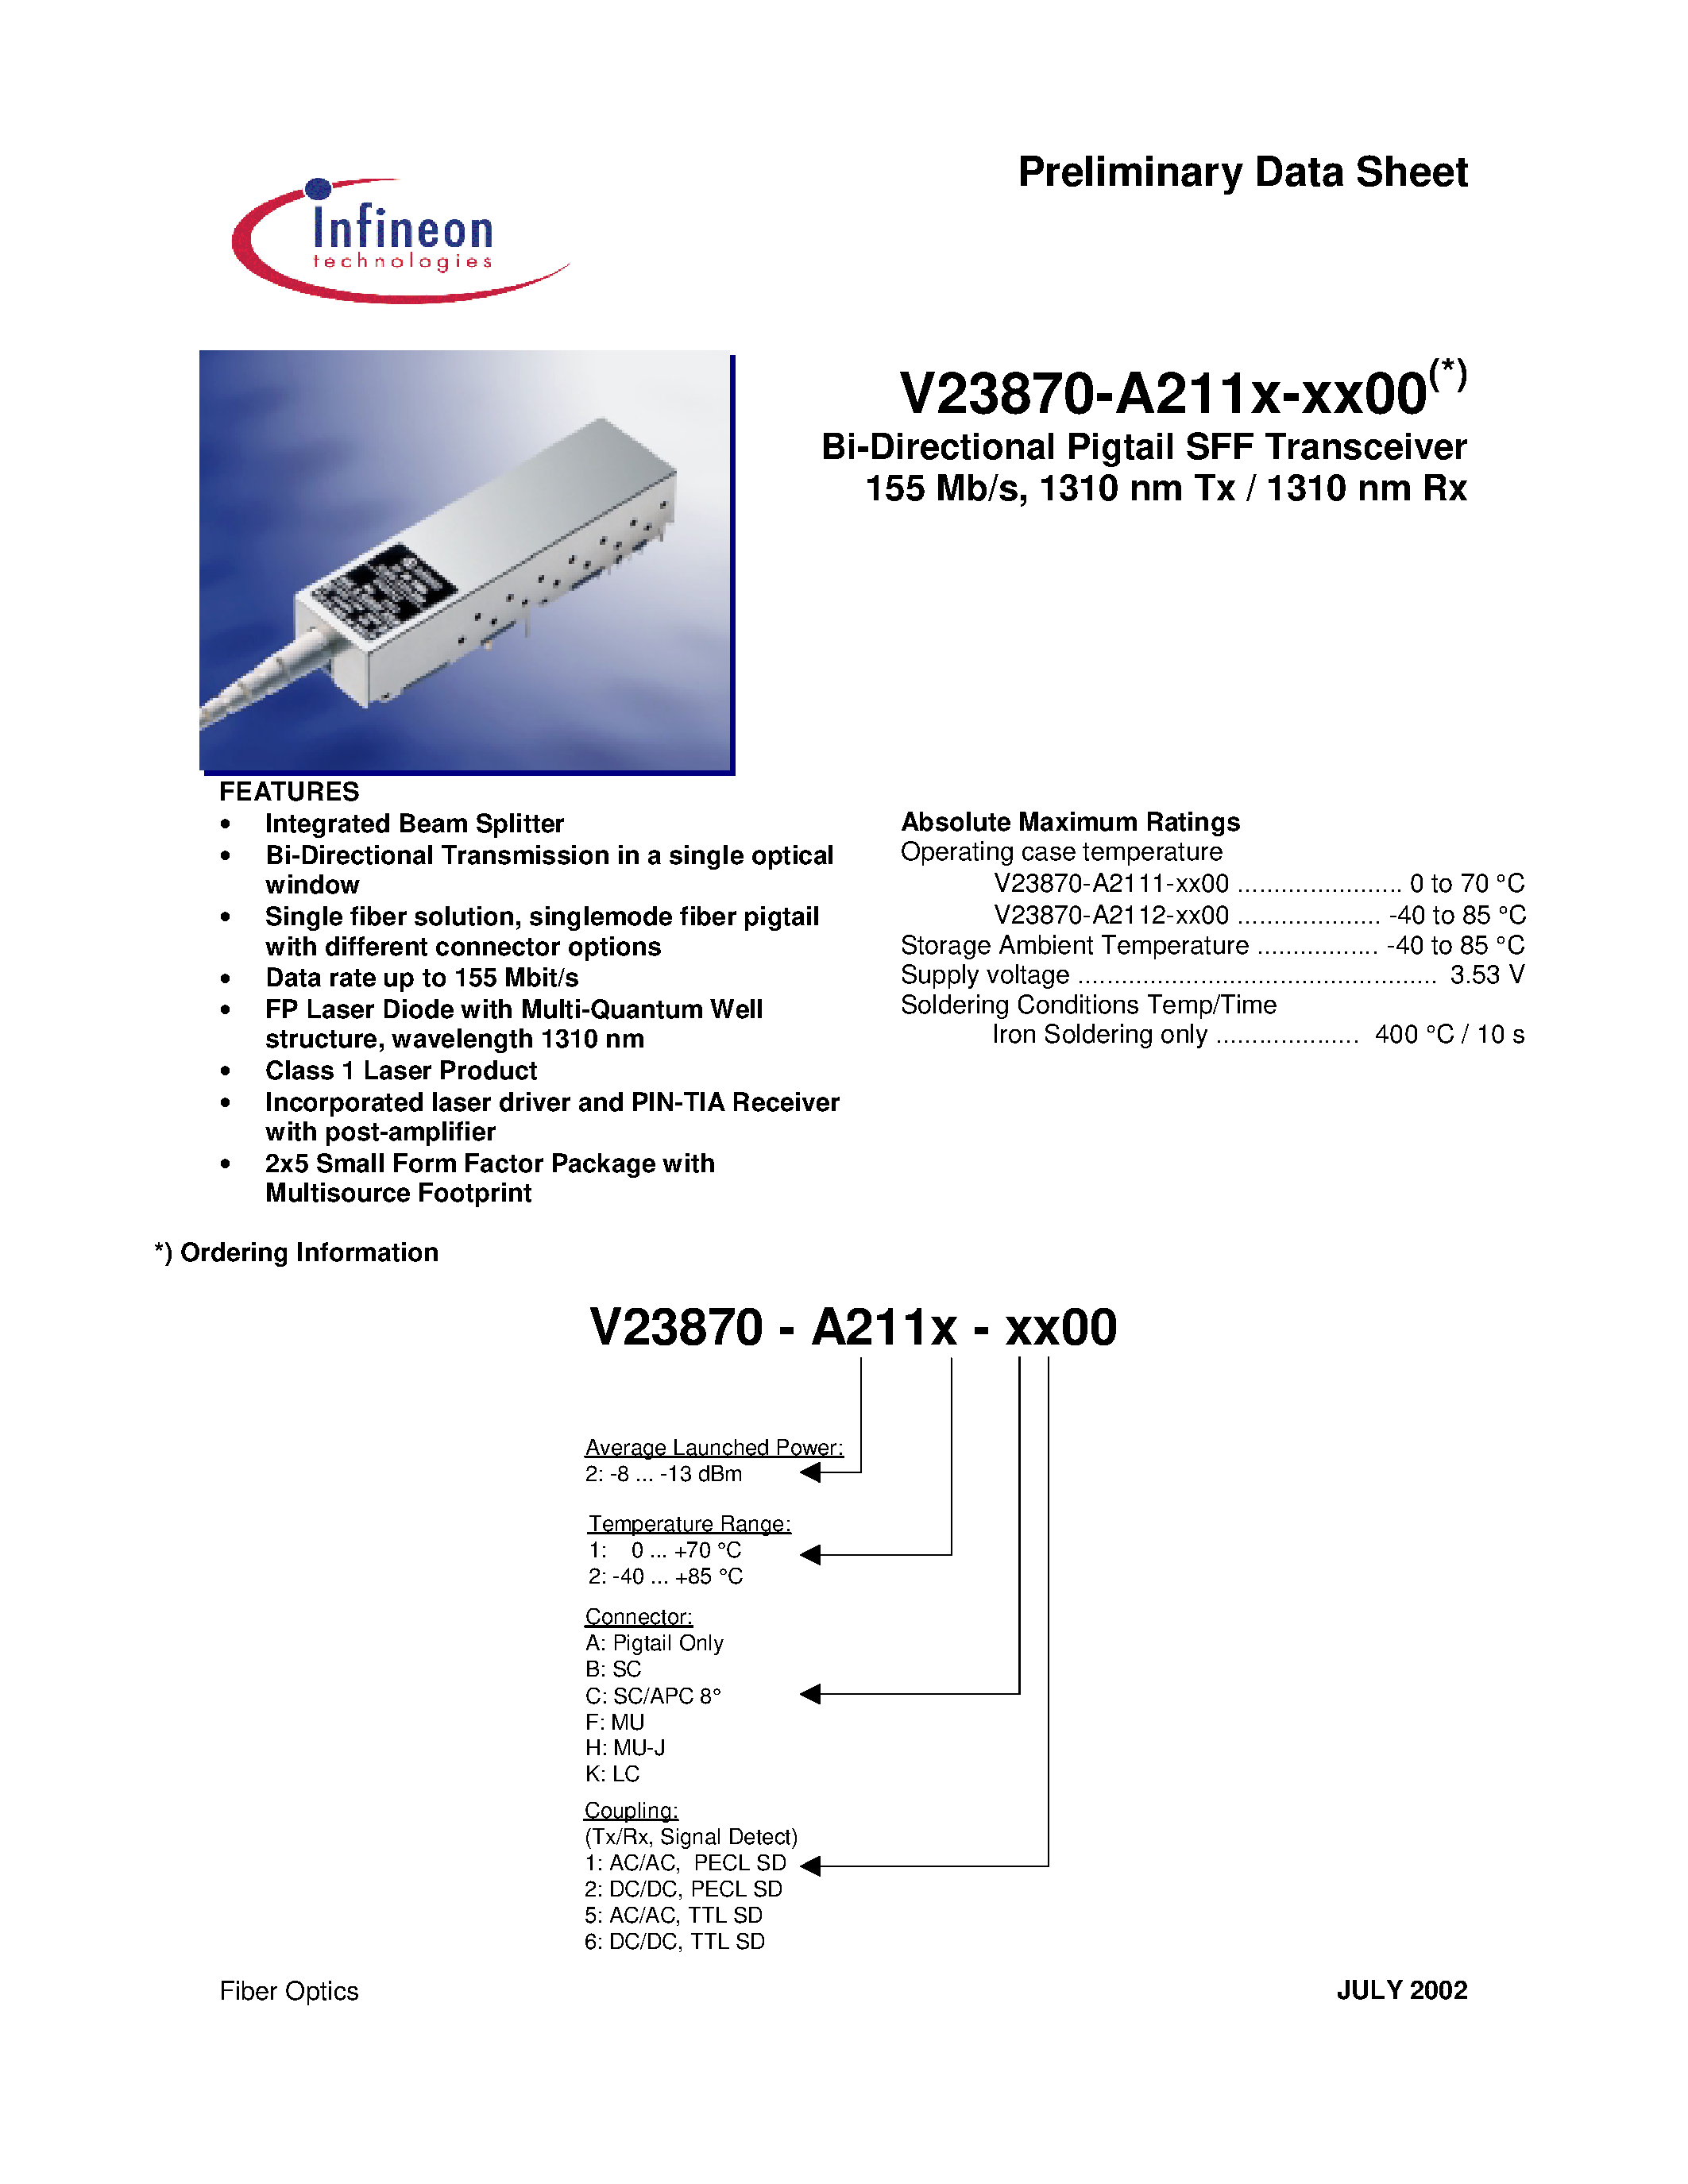 Datasheet V23870-A2111-B200 - Bi-Directional Pigtail SFF Transceiver 155 Mb/s/ 1310 nm Tx / 1310 nm Rx page 1